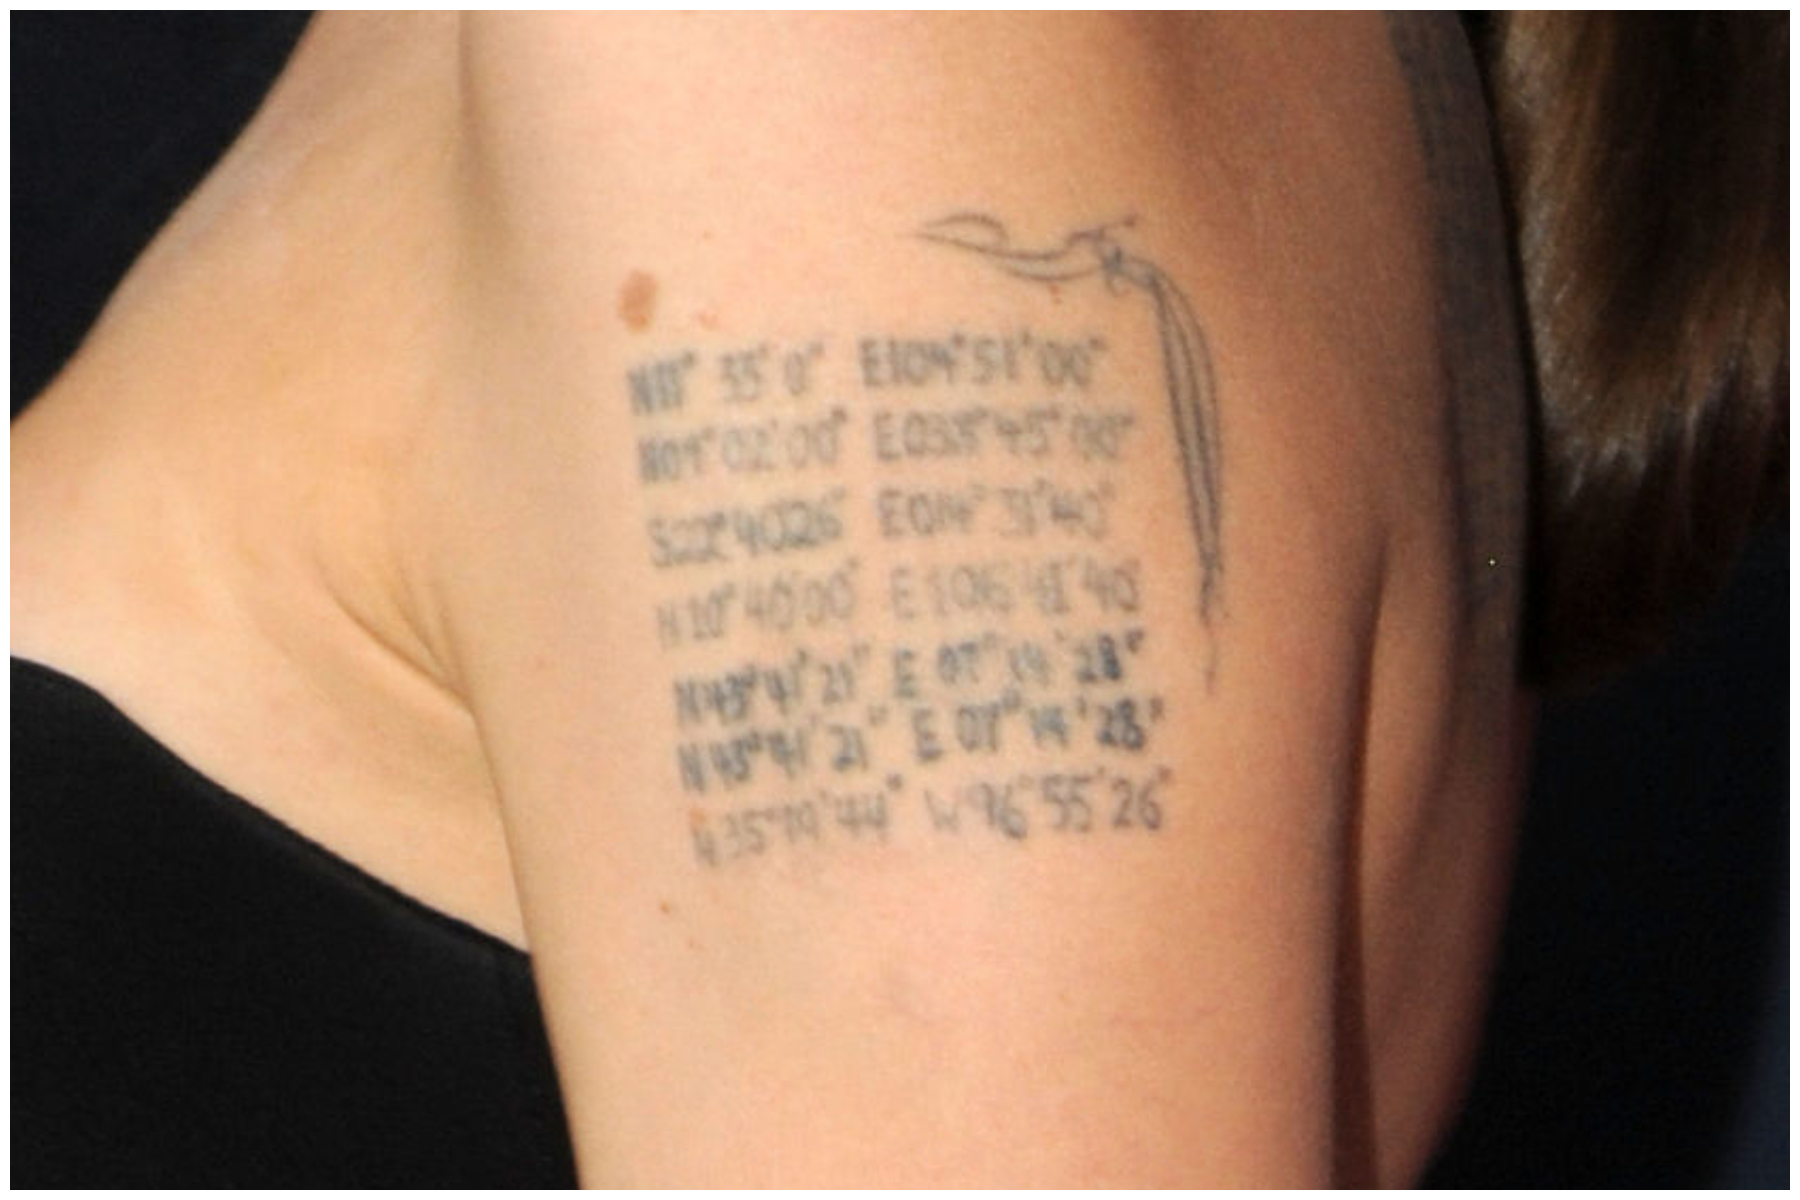 Actress Angelina Jolie's coordinates tattoo on her upper arm during "The Normal Heart" New York Screening at Ziegfeld Theater in New York City.